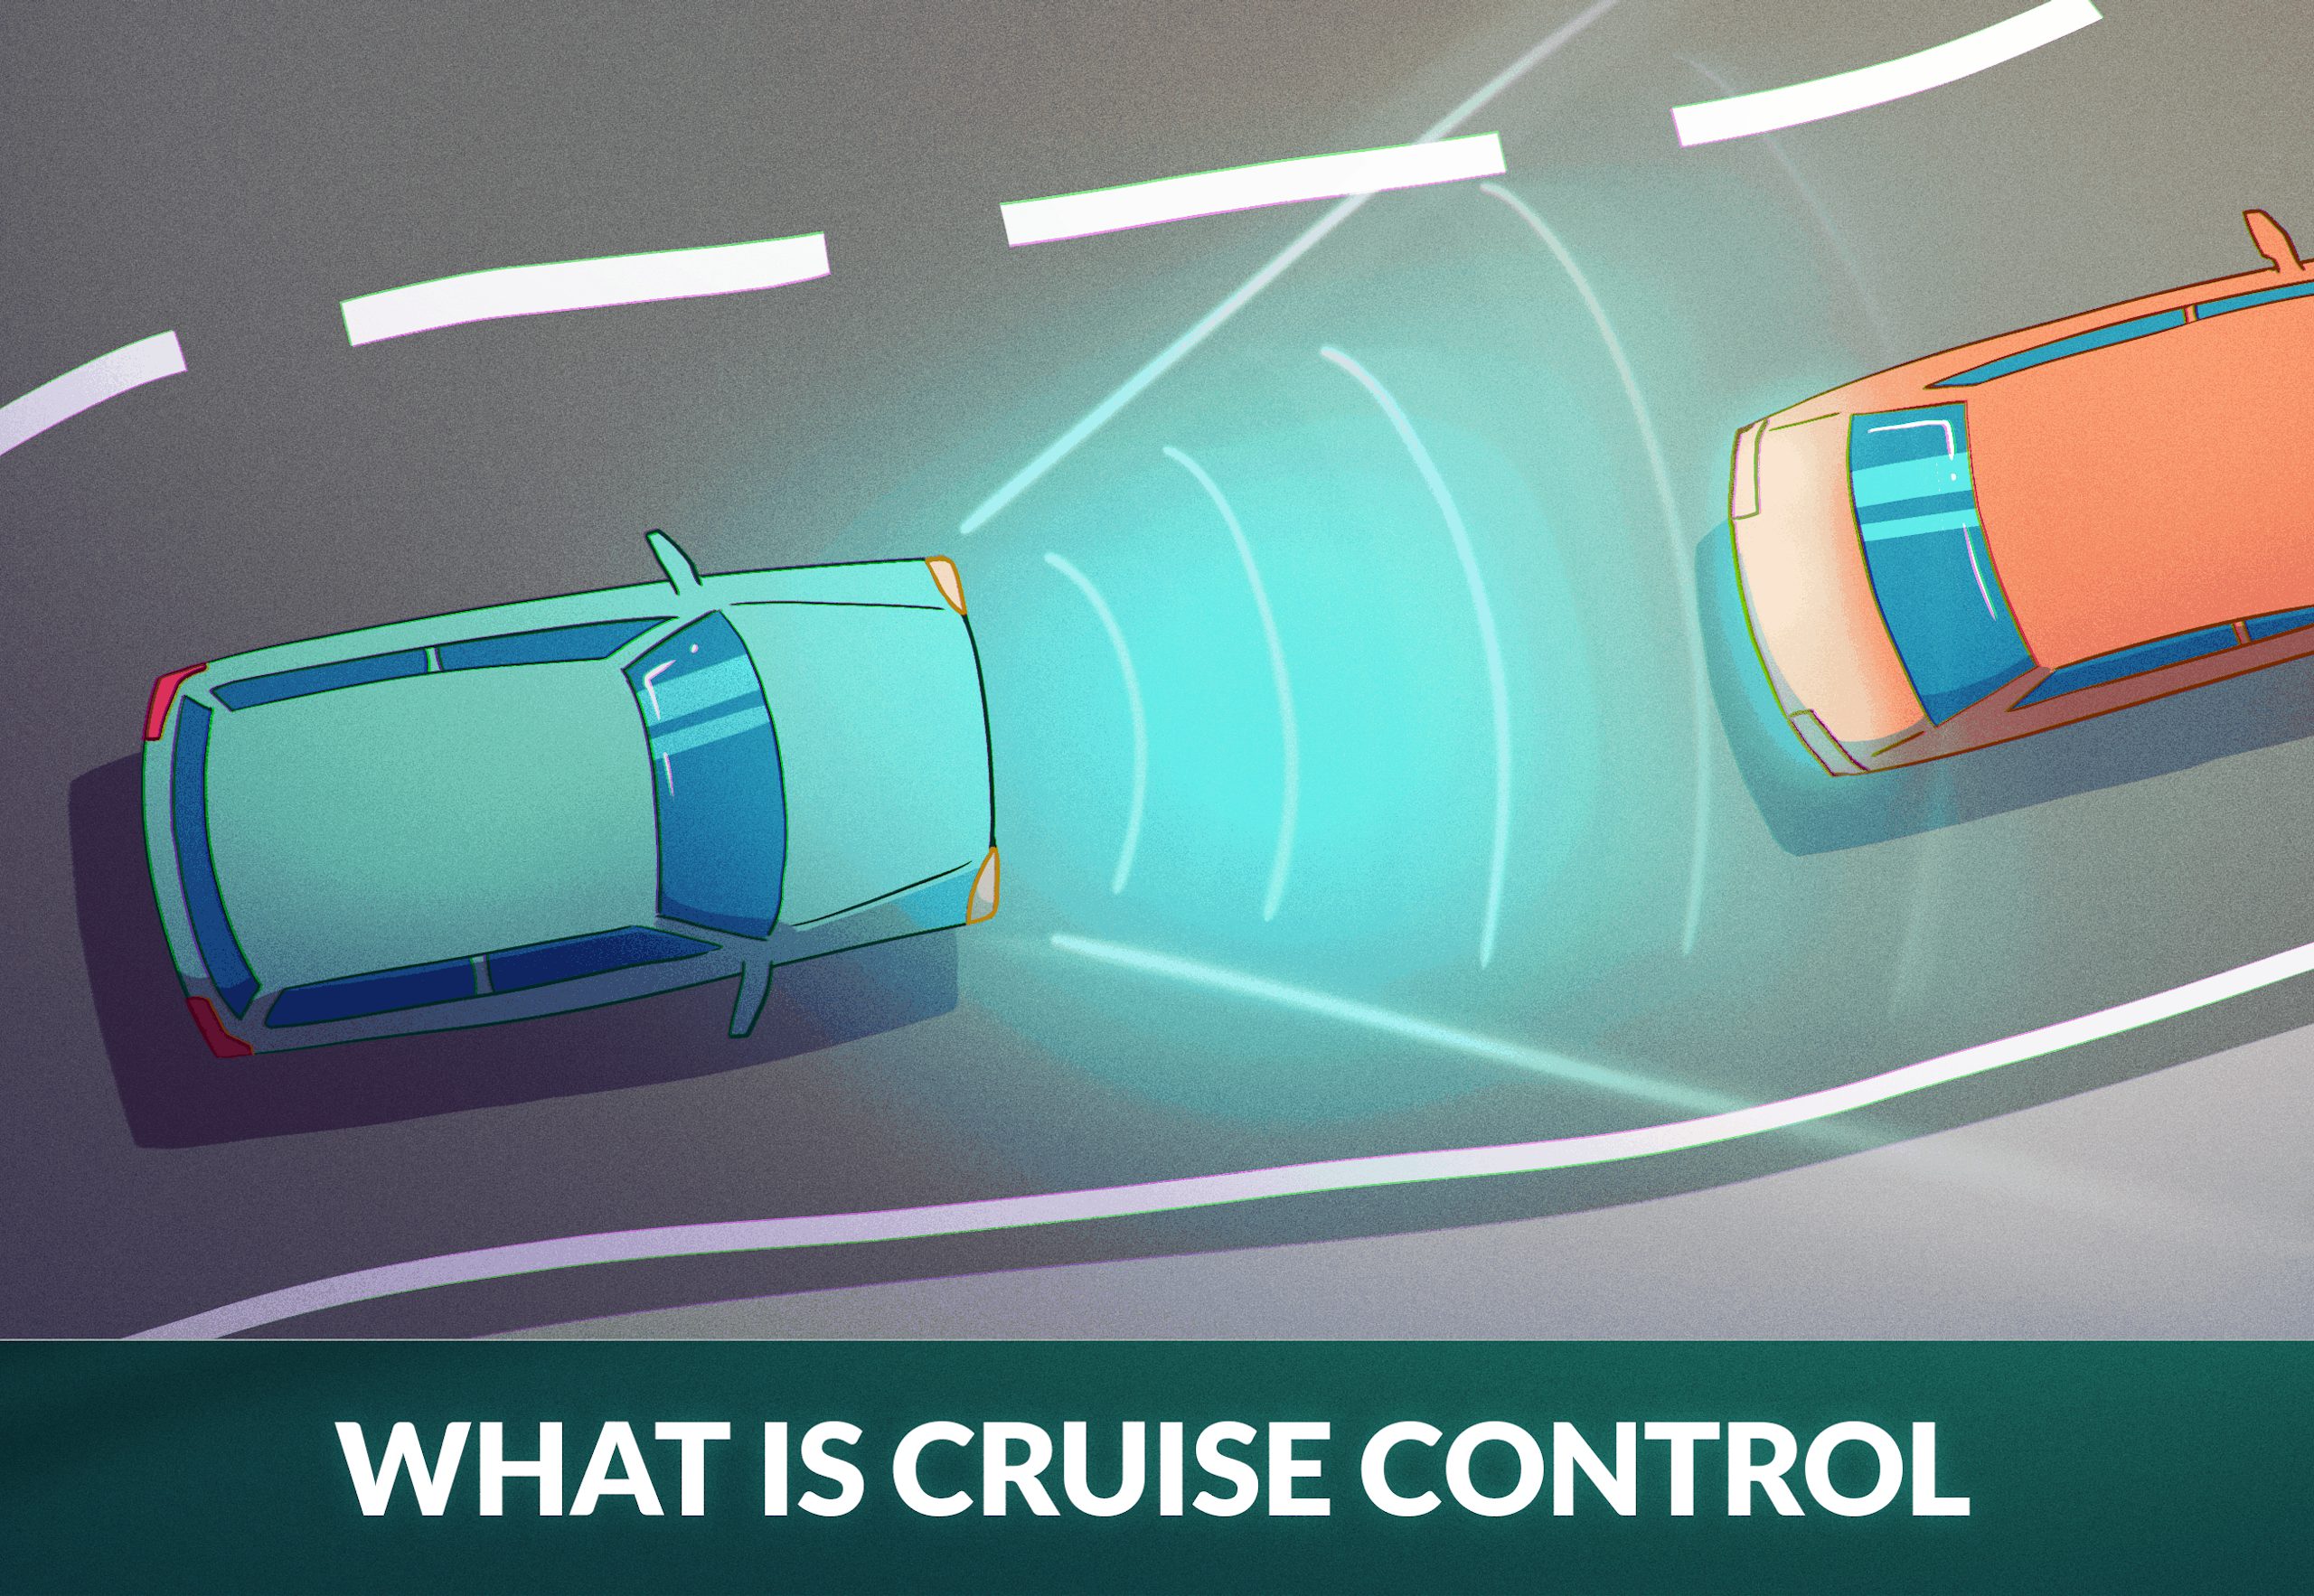 https://media-blog.zutobi.com/wp-content/uploads/sites/2/2021/03/18112143/What-is-Cruise-Control.png?w=2560&auto=format&ixlib=next&fit=max